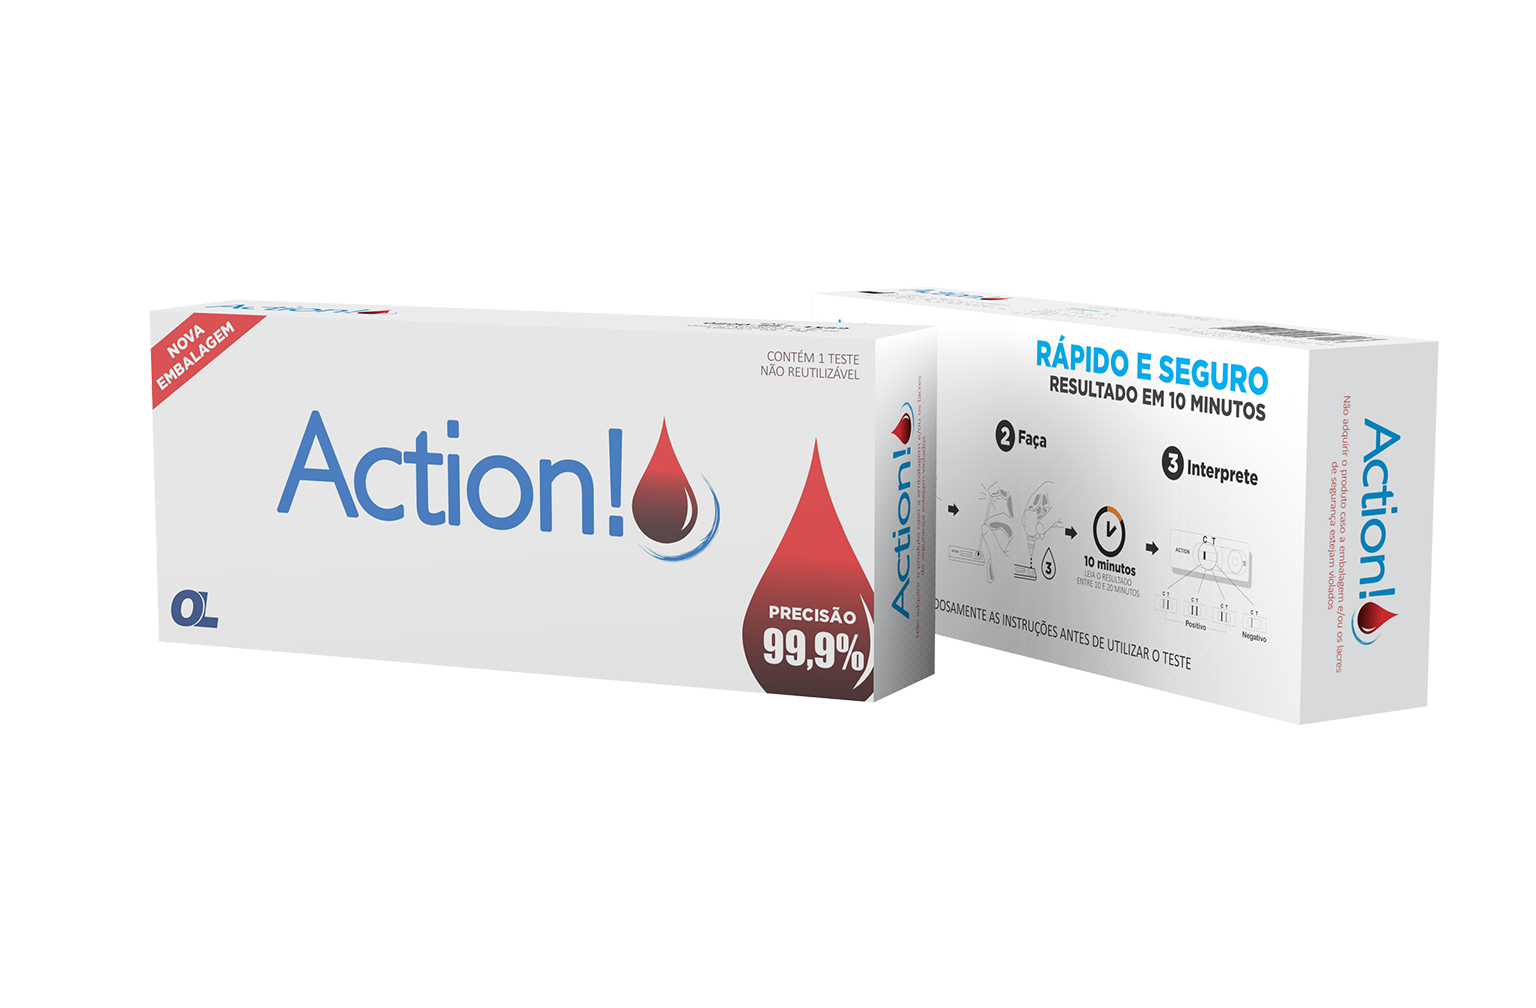 Chembio Action HIV Self Test Product Image